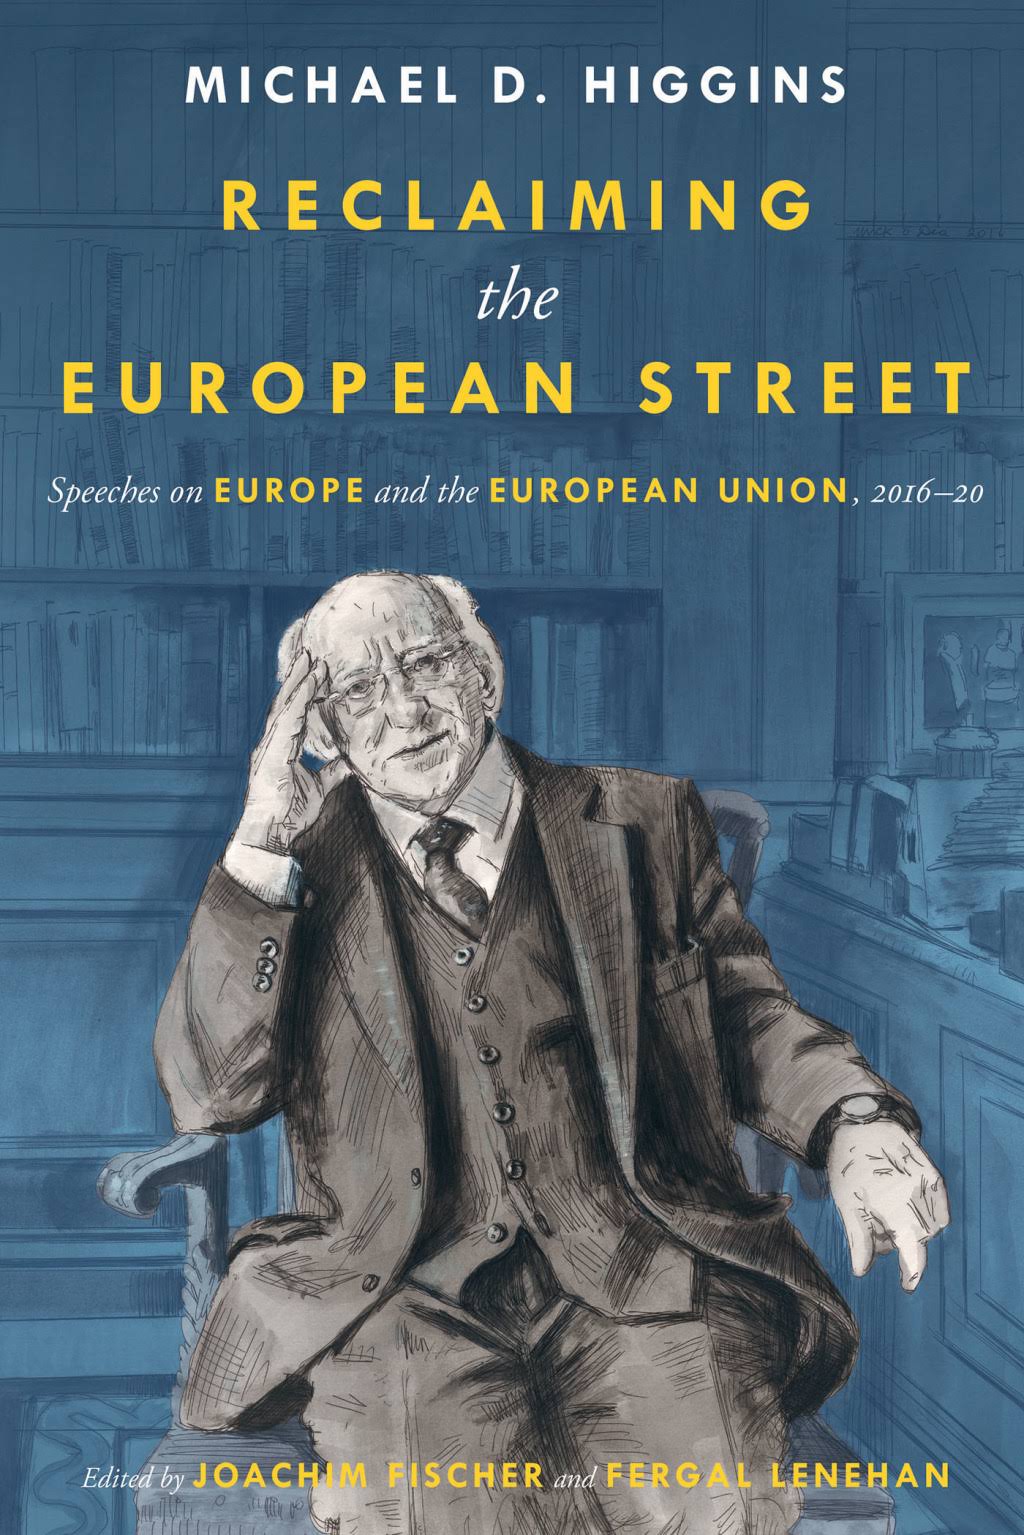 Reclaiming the European Street: Speeches on Europe and the European Union, 2016-20 [Book]